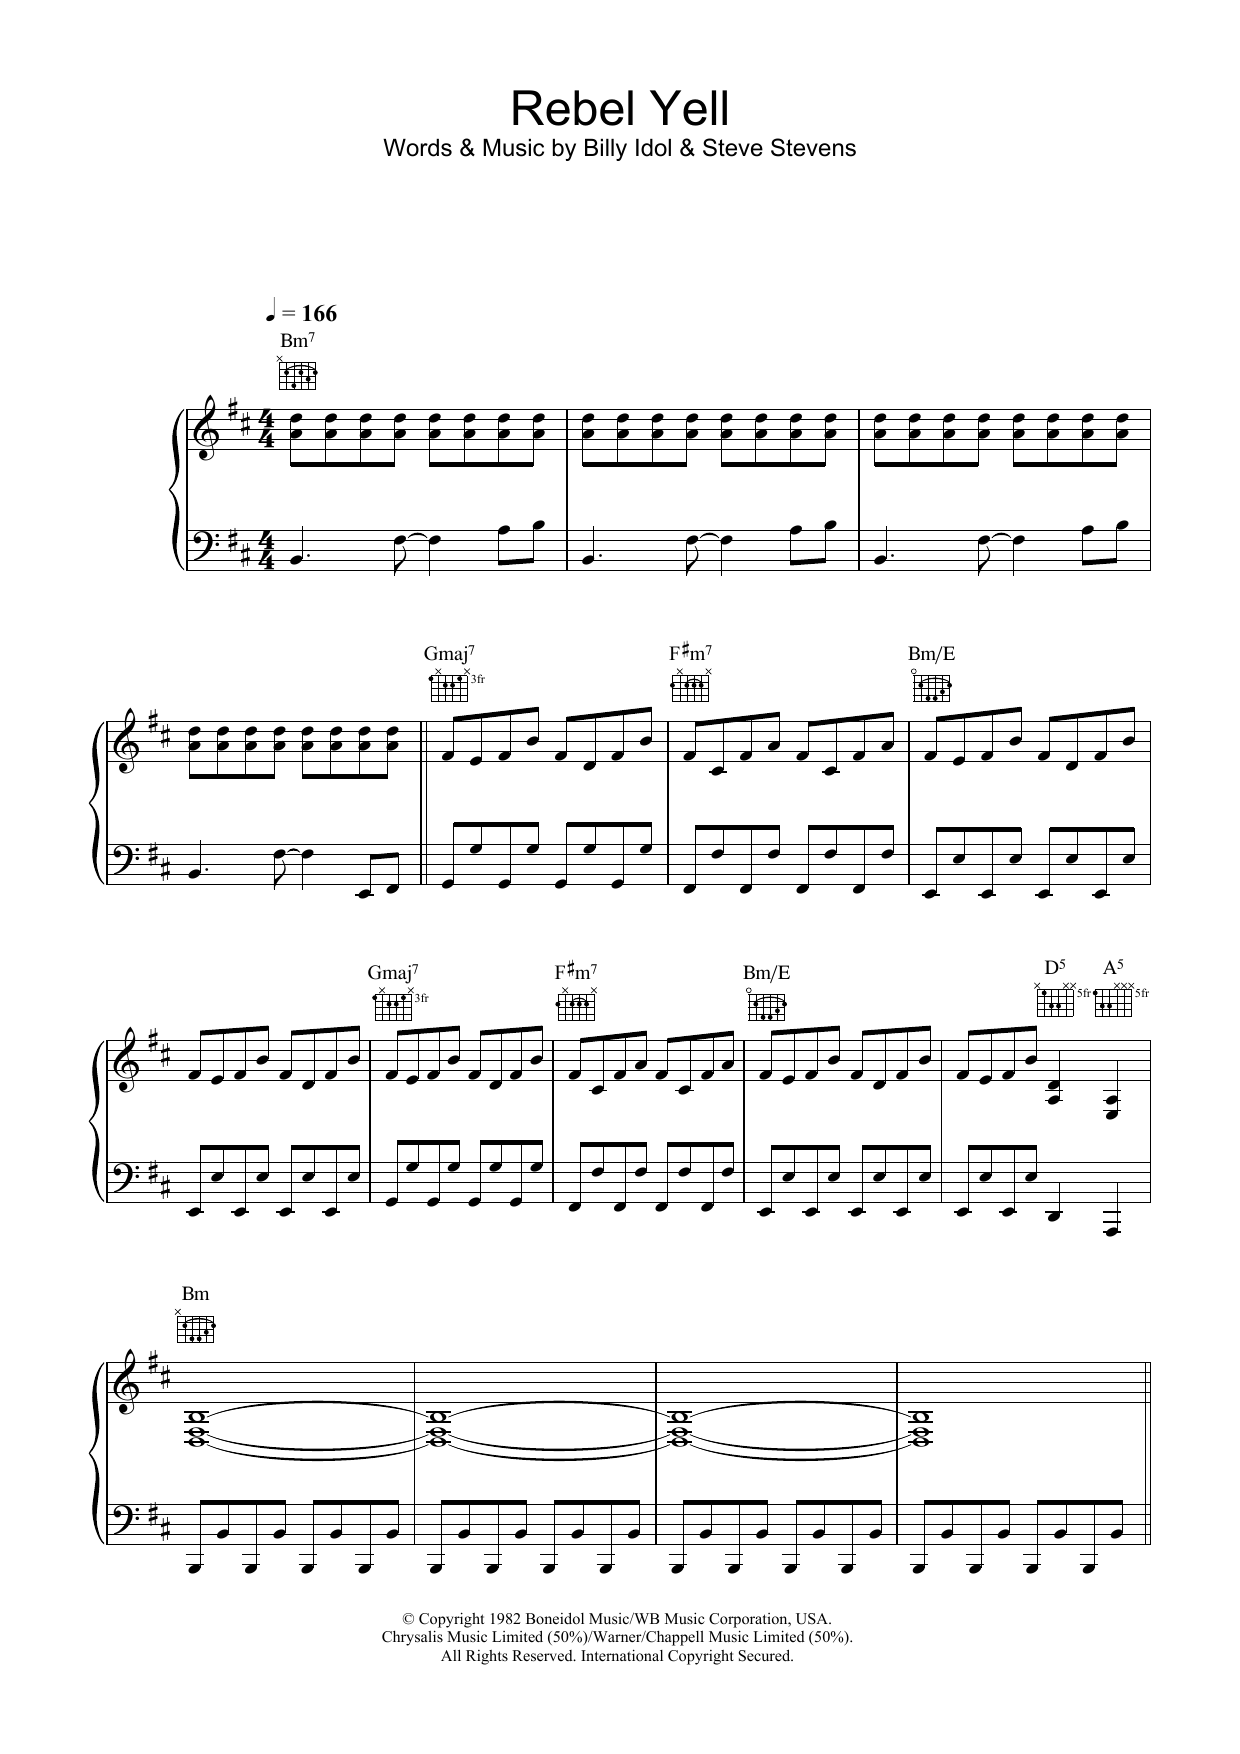 Download Billy Idol Rebel Yell sheet music notes and chords for Piano, Vocal & Guitar - Download Printable PDF and start playing in minutes.